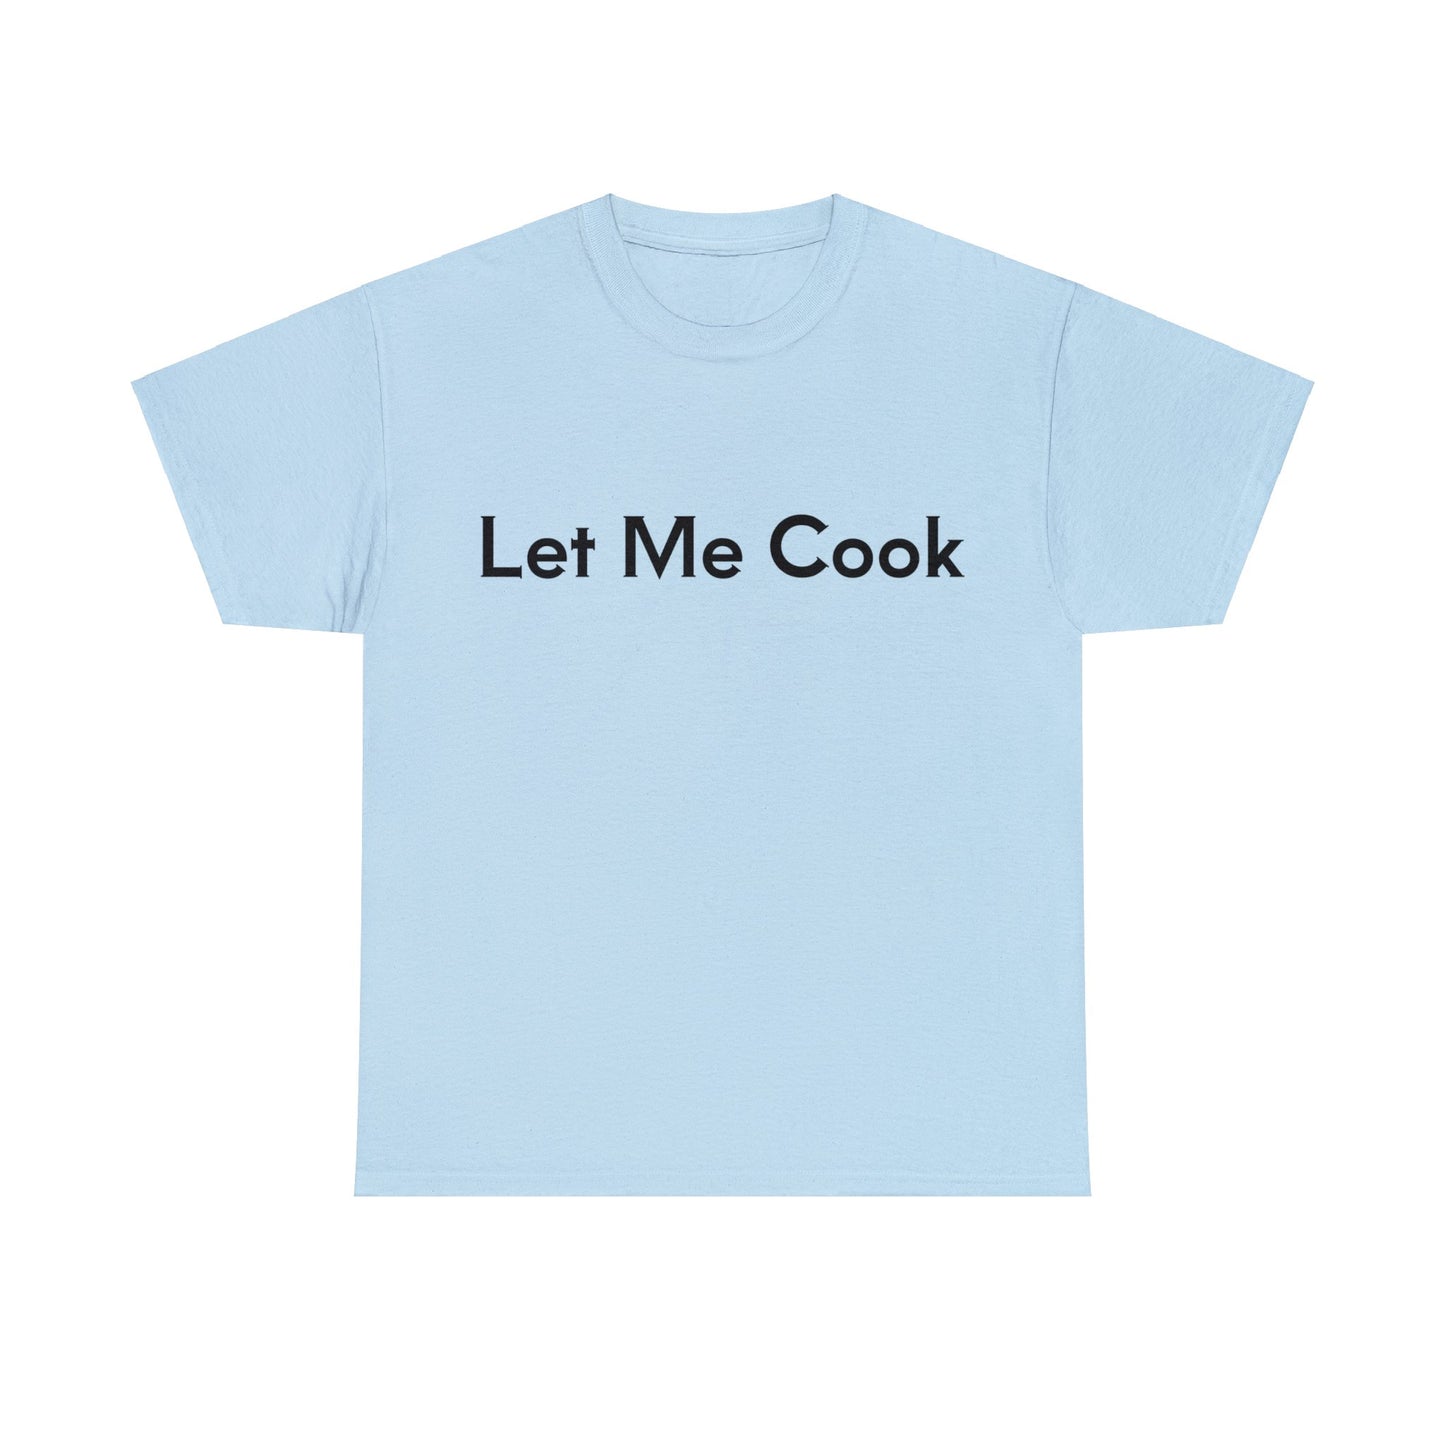 Let Me Cook